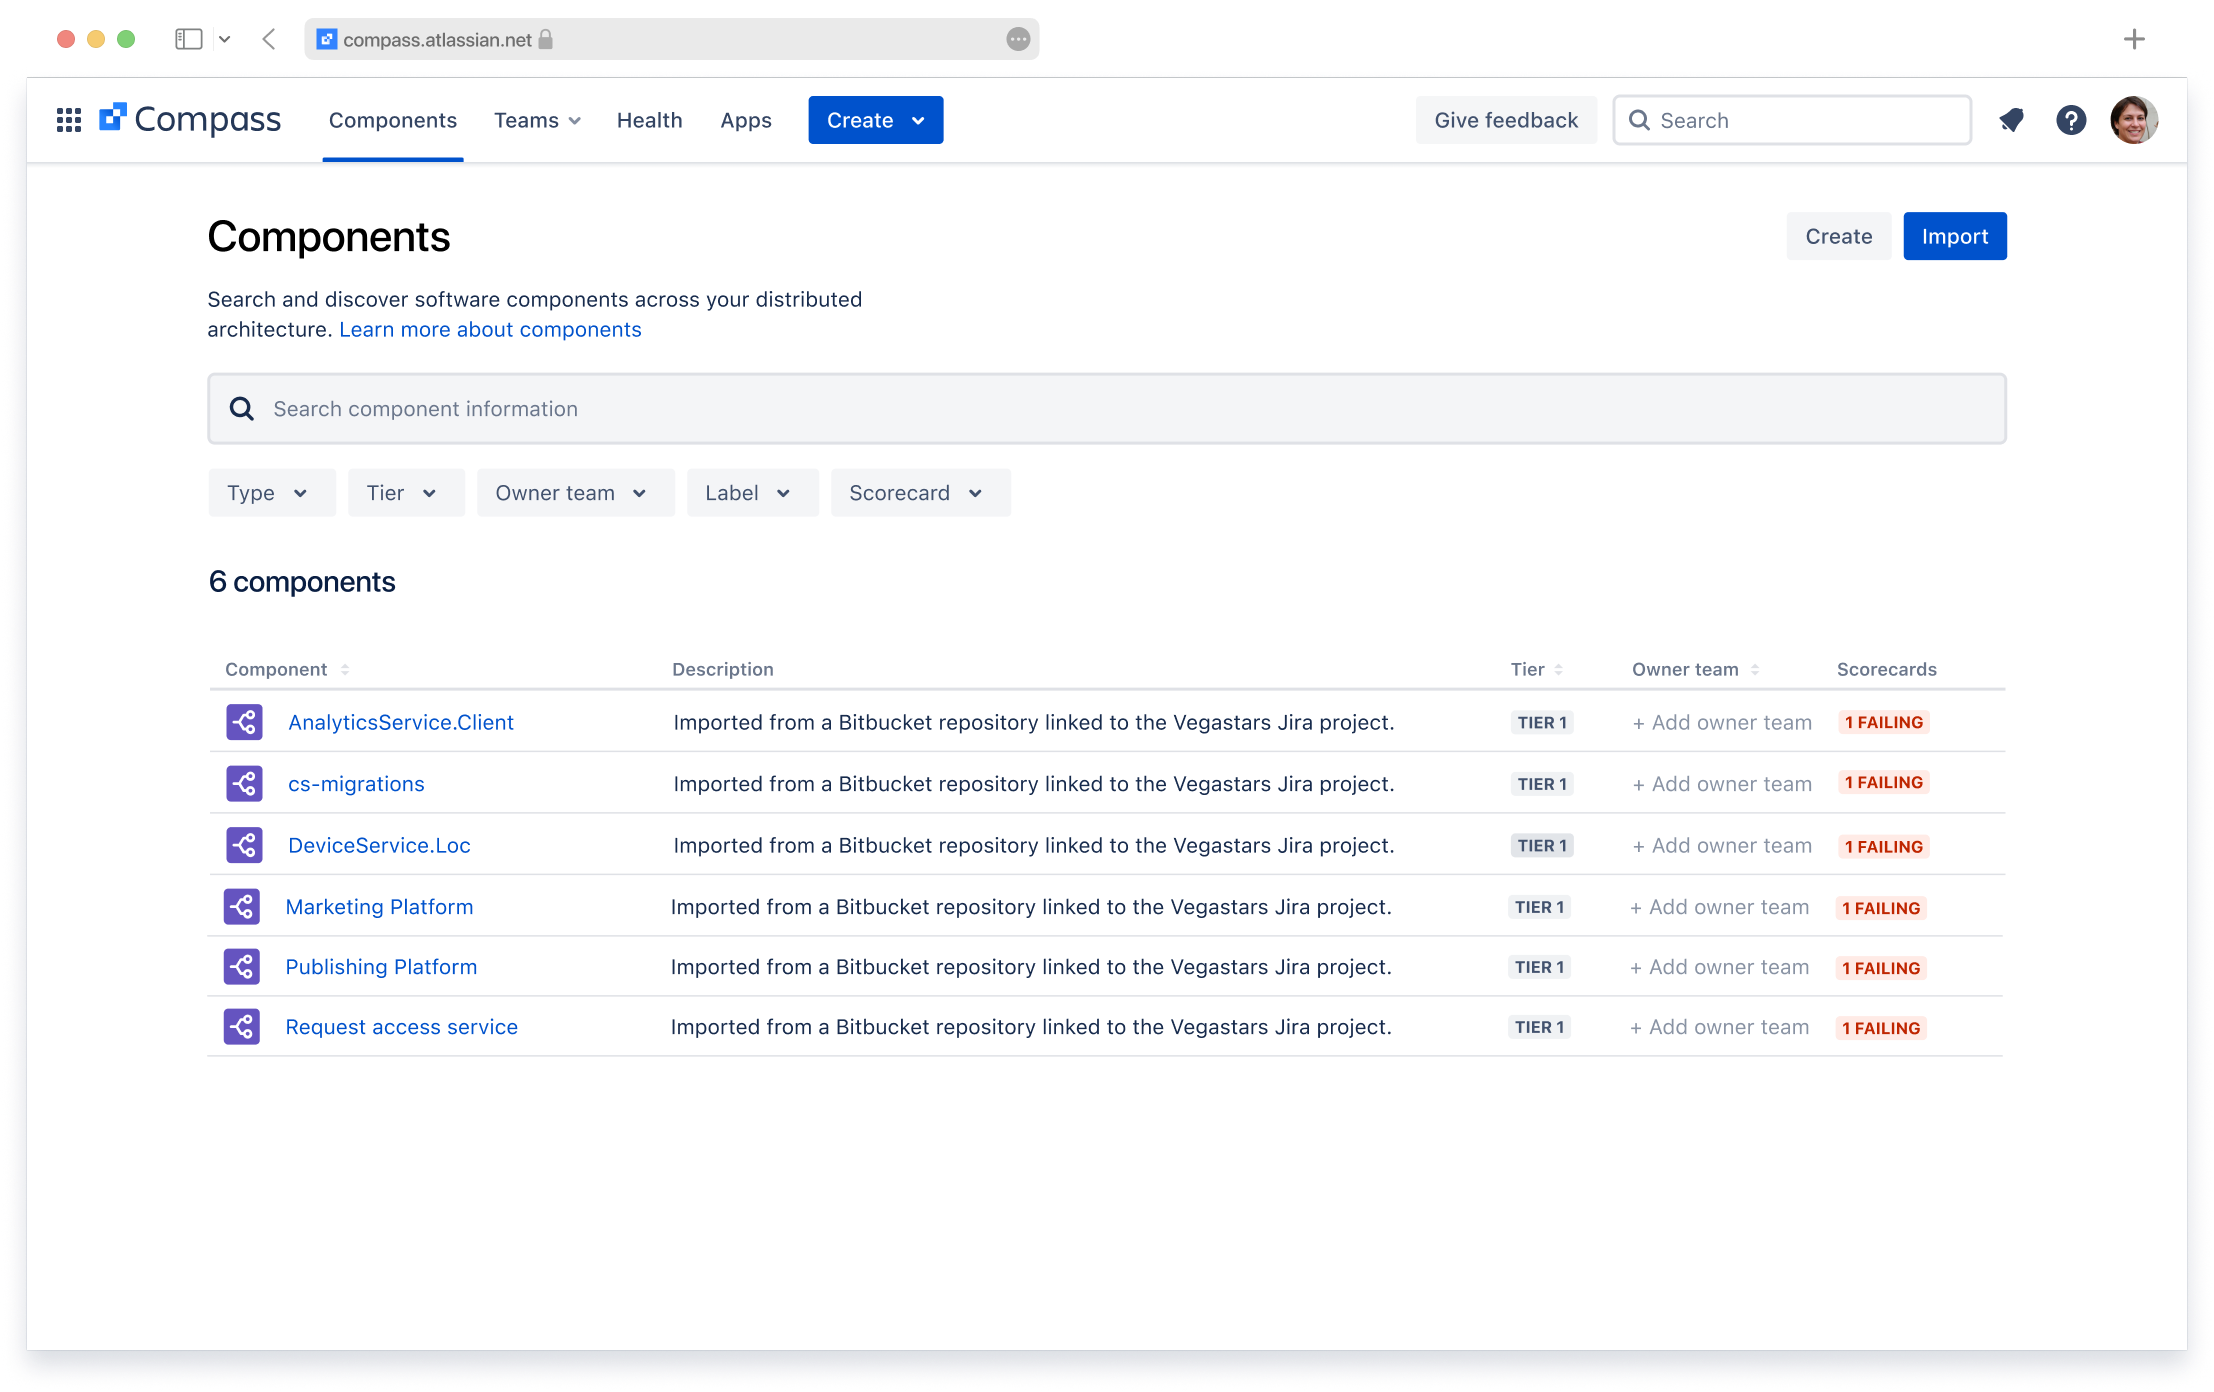 The Compass Components page, showing components created from repositories linked to Jira